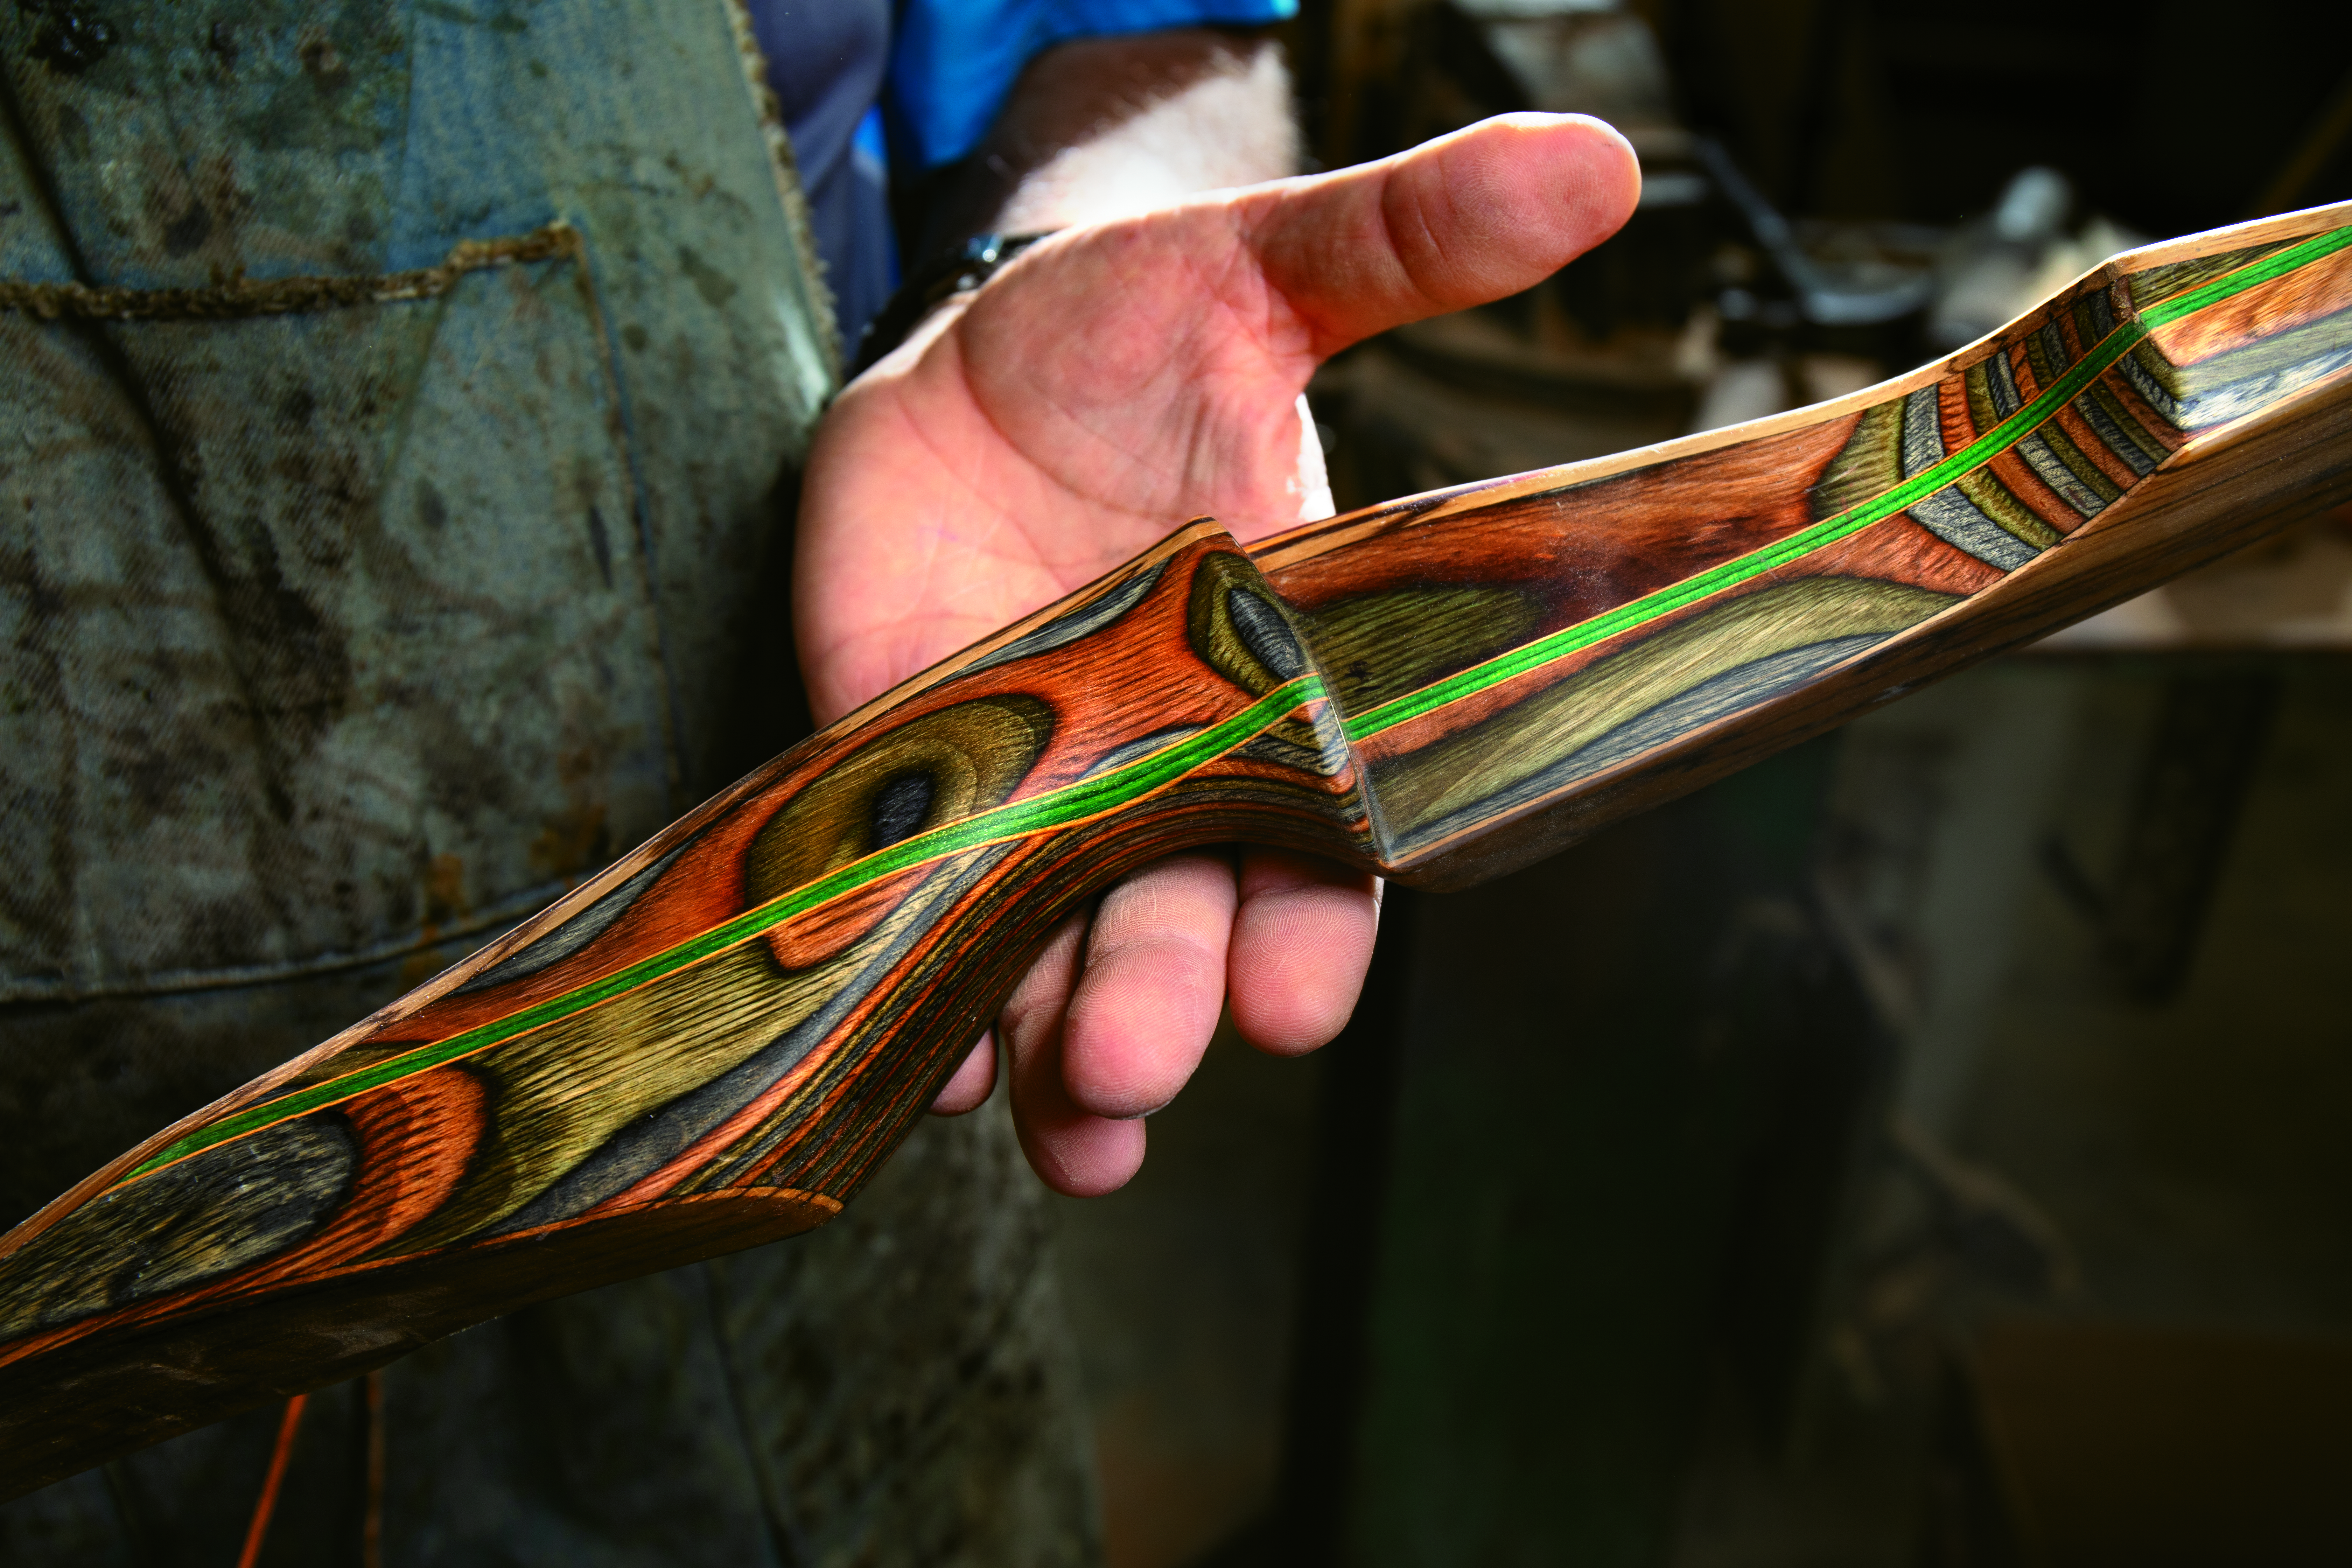 “The traditional bow has evolved into a work of art over thousands of years,” says Tom. 